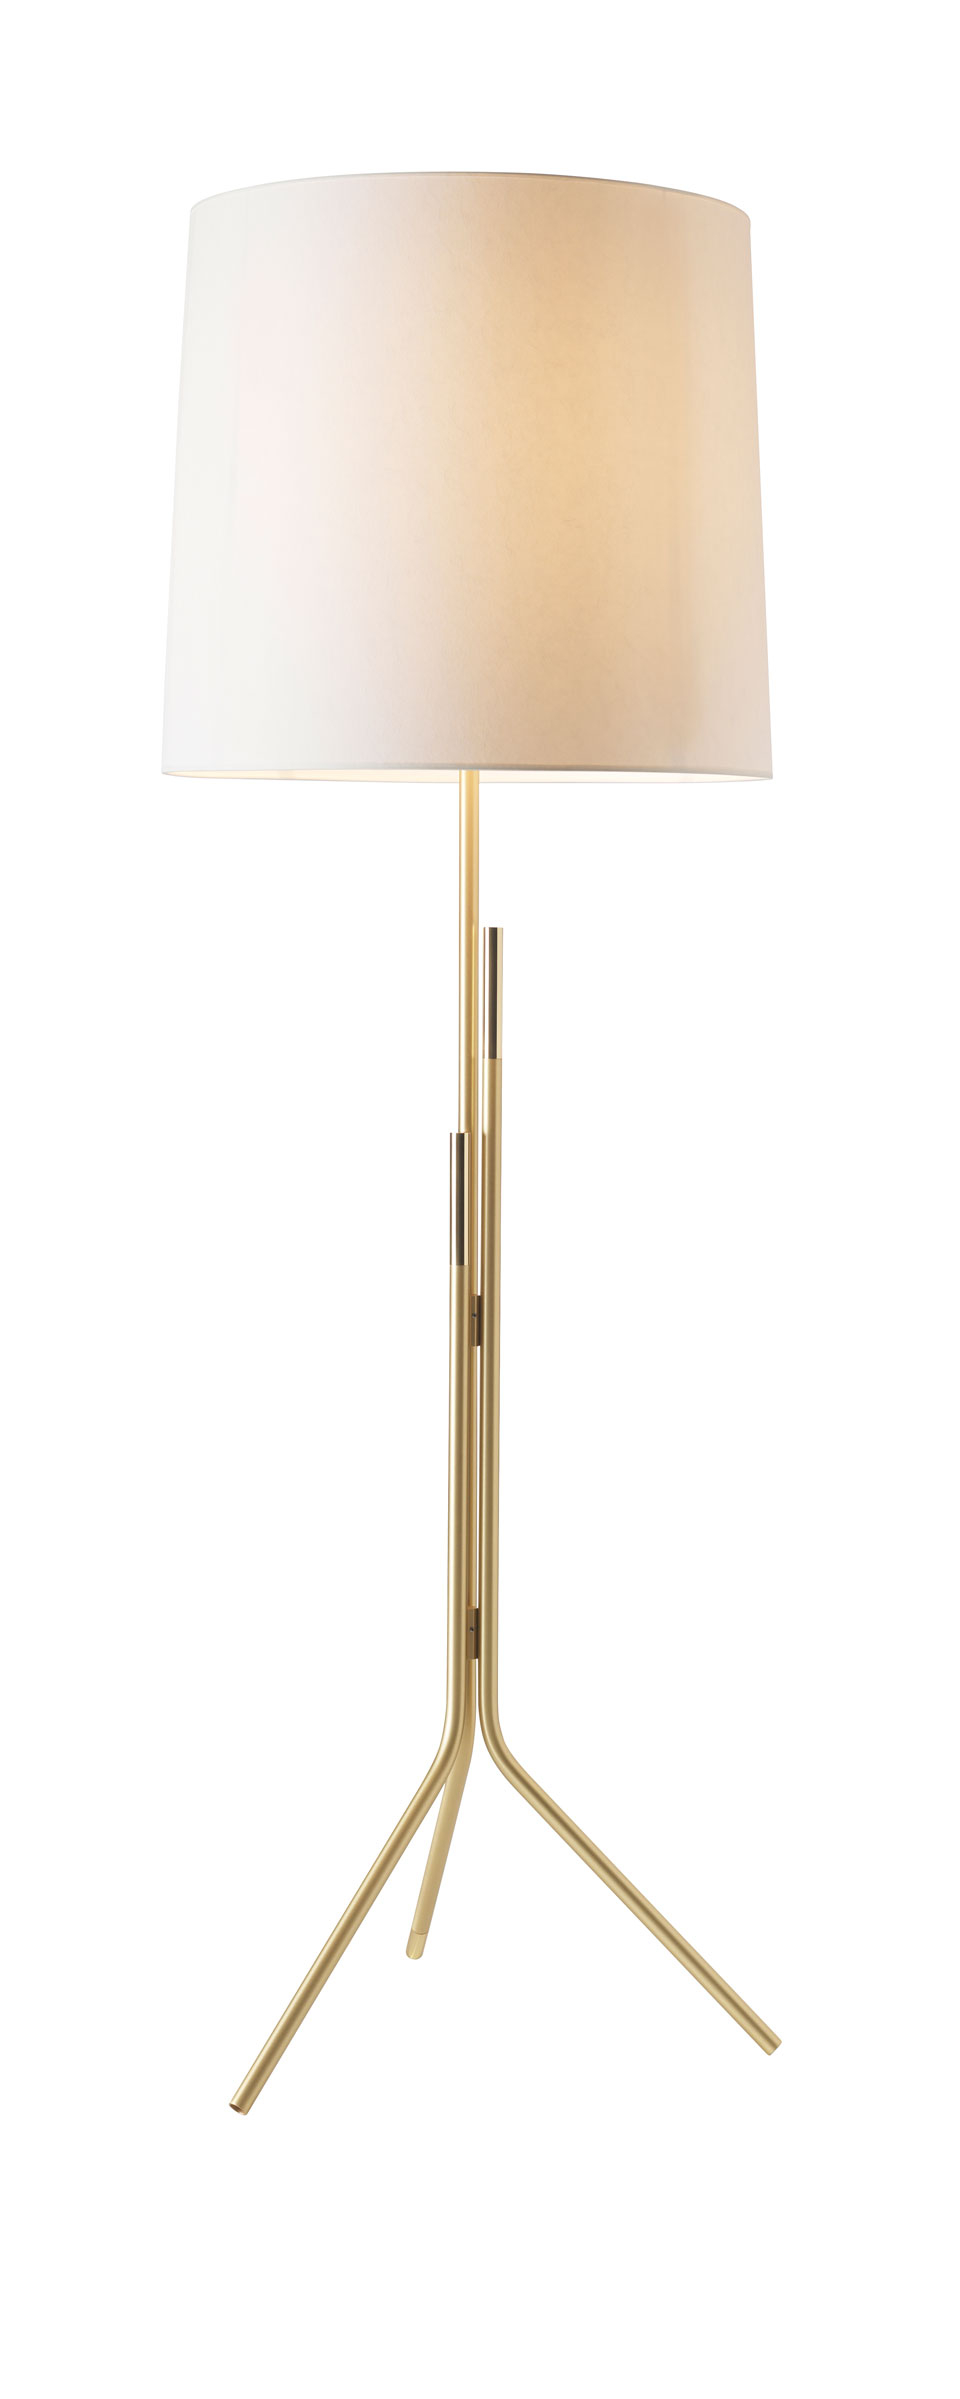 Contemporary Floor Lamp Brass Stand Cylindrical Shade In White Drop Paper Design Herv Langlais inside proportions 960 X 2399